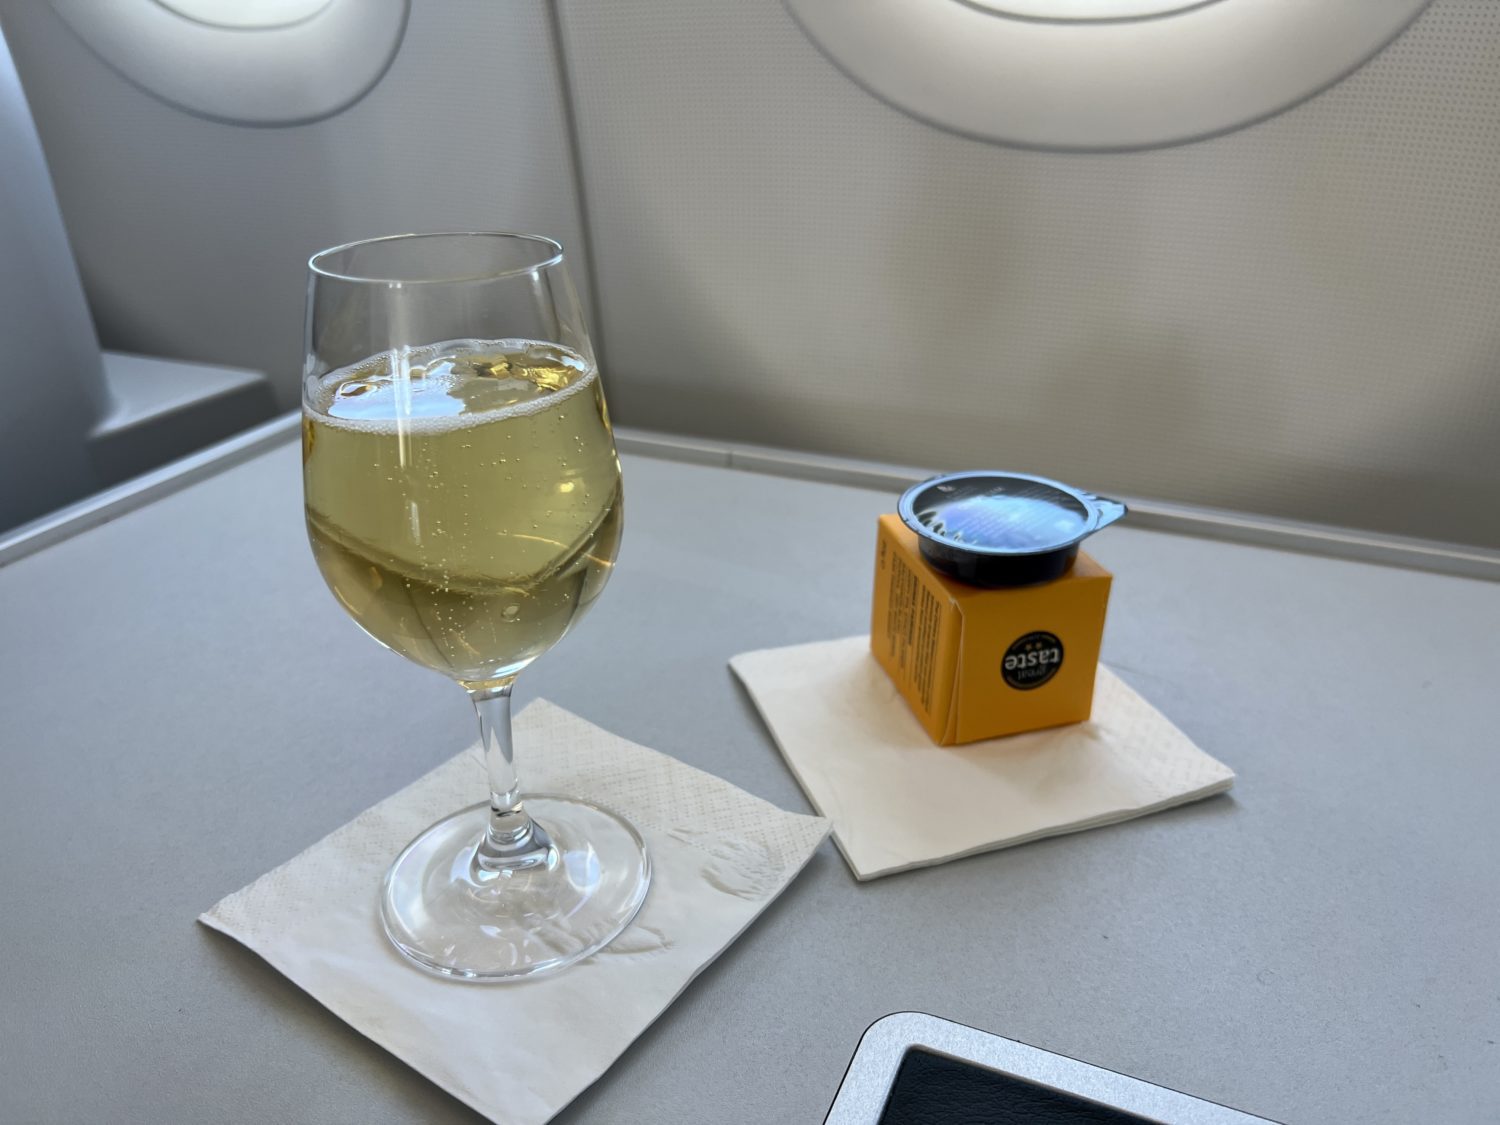 aer lingus business class dining